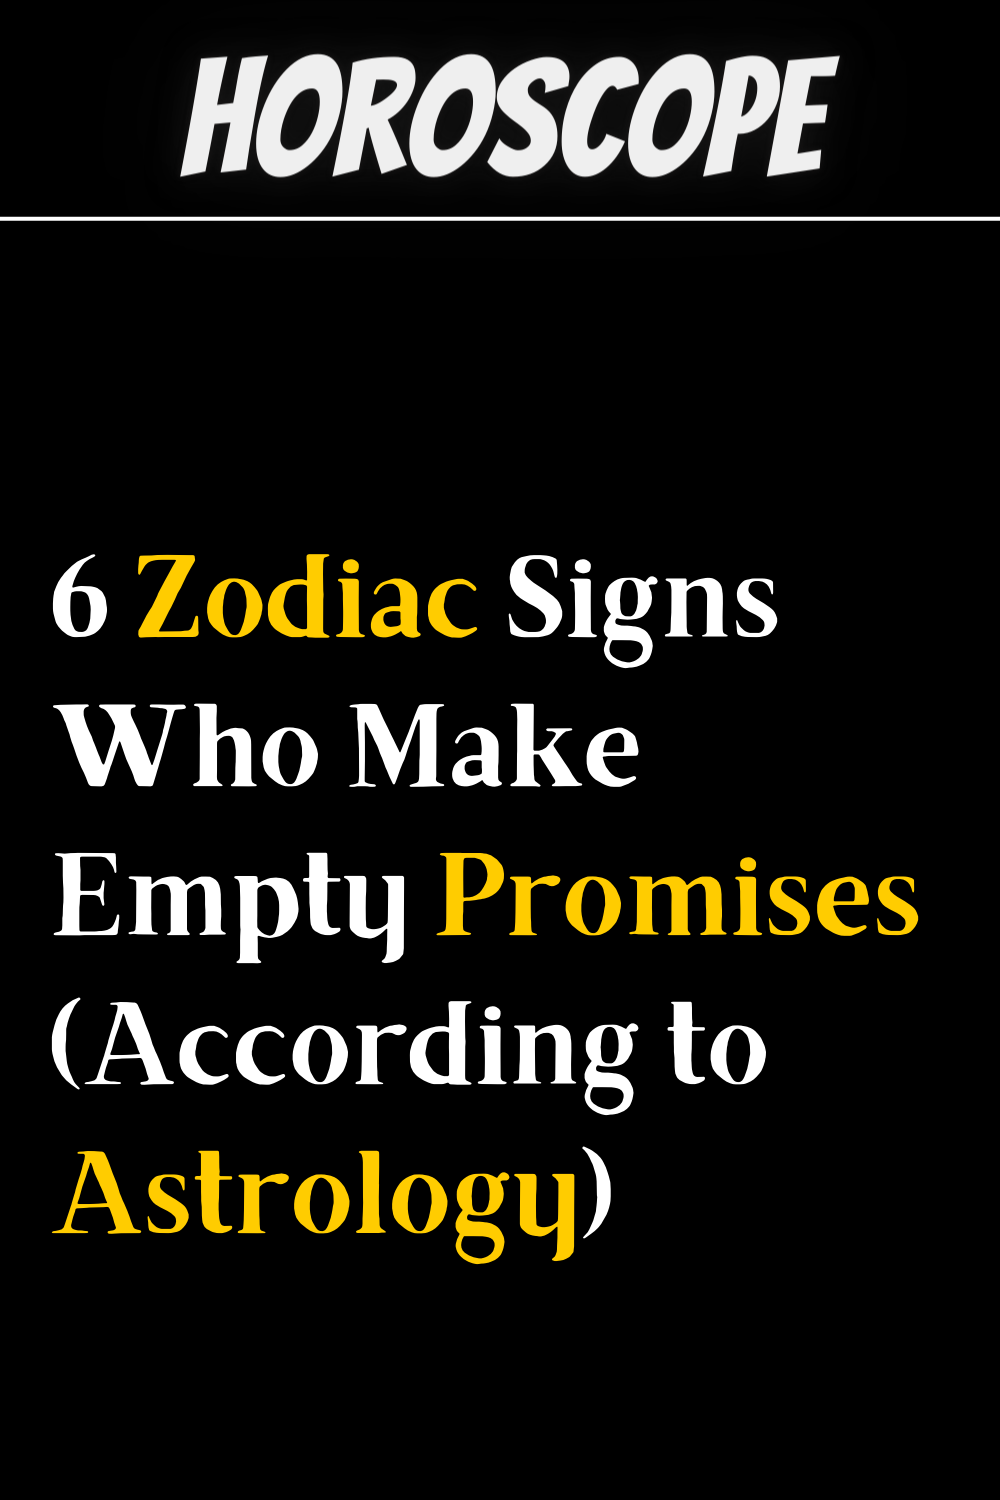 6 Zodiac Signs Who Make Empty Promises (According to Astrology)